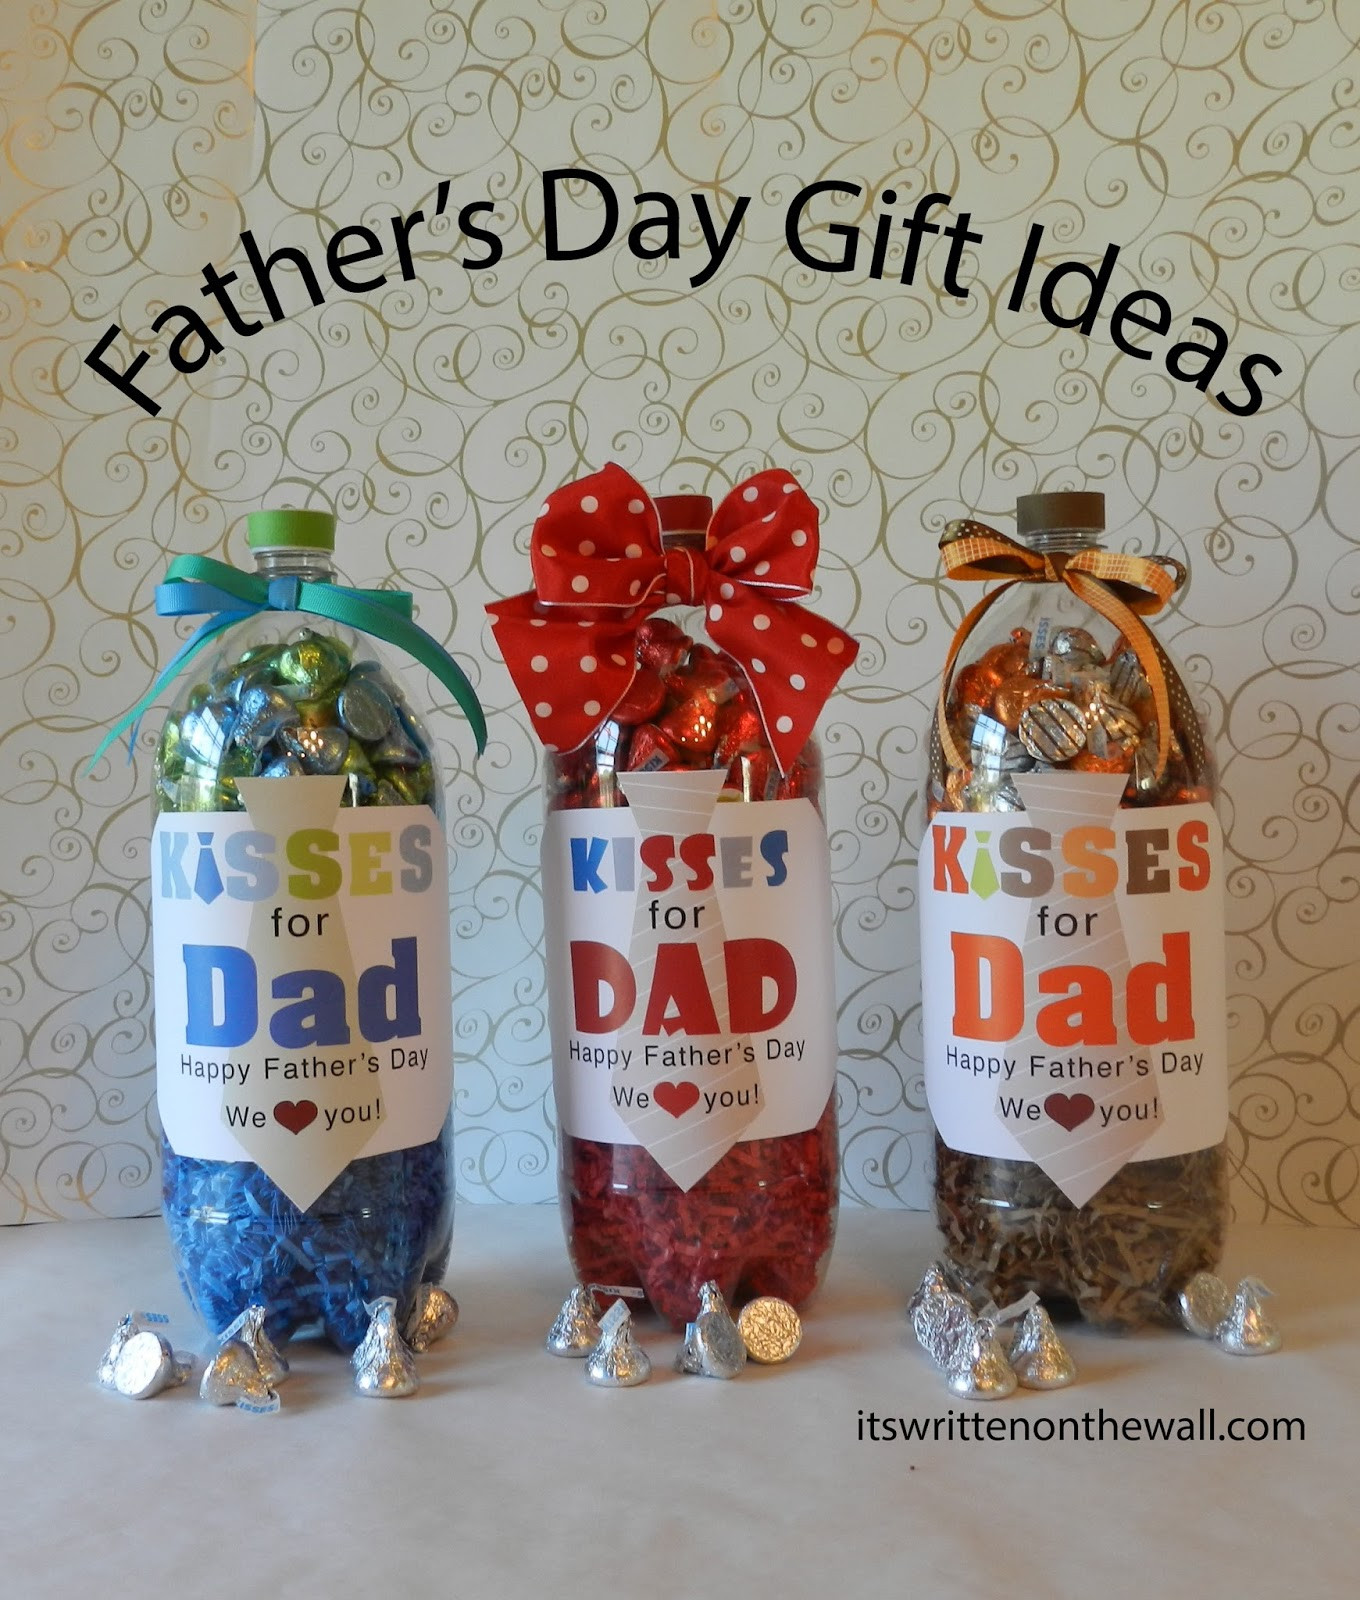 Gift Ideas For New Fathers
 It s Written on the Wall Fathers Day Gift Ideas For the